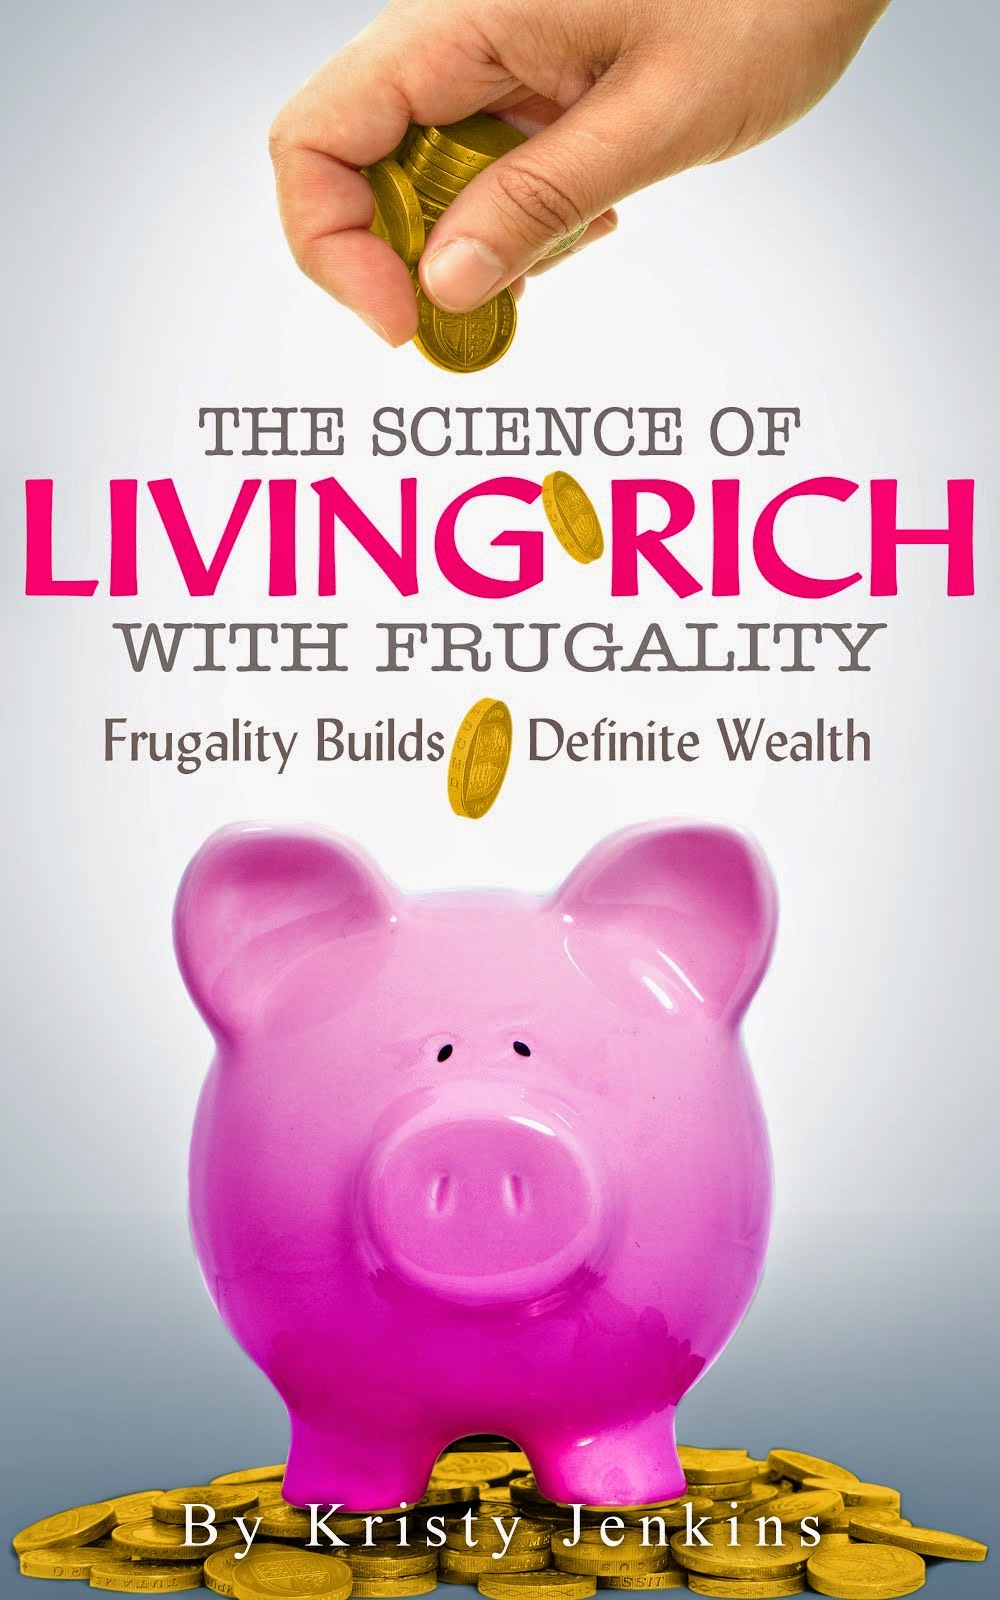 Science of Living Rich with Frugality